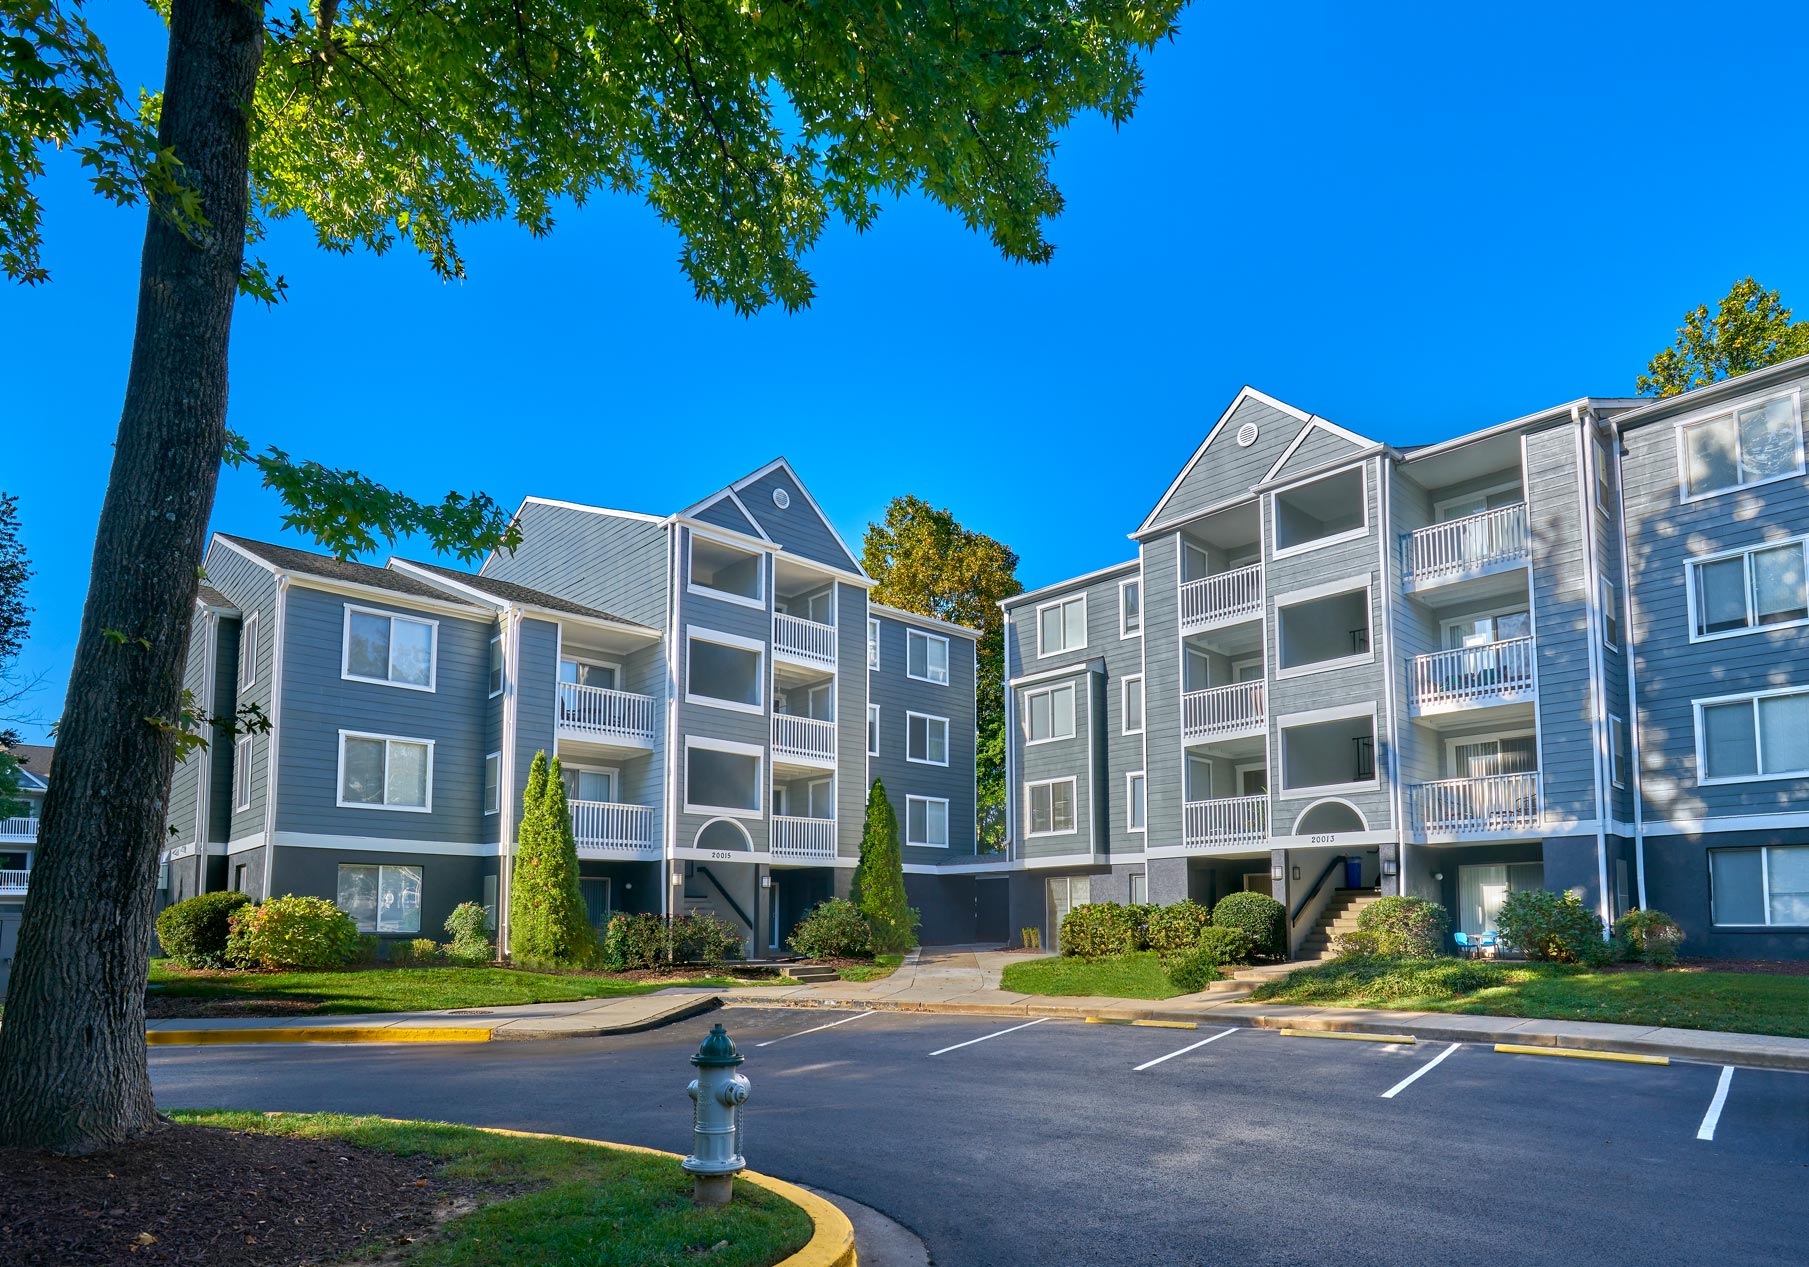 Canterbury Apartments in Germantown, MD